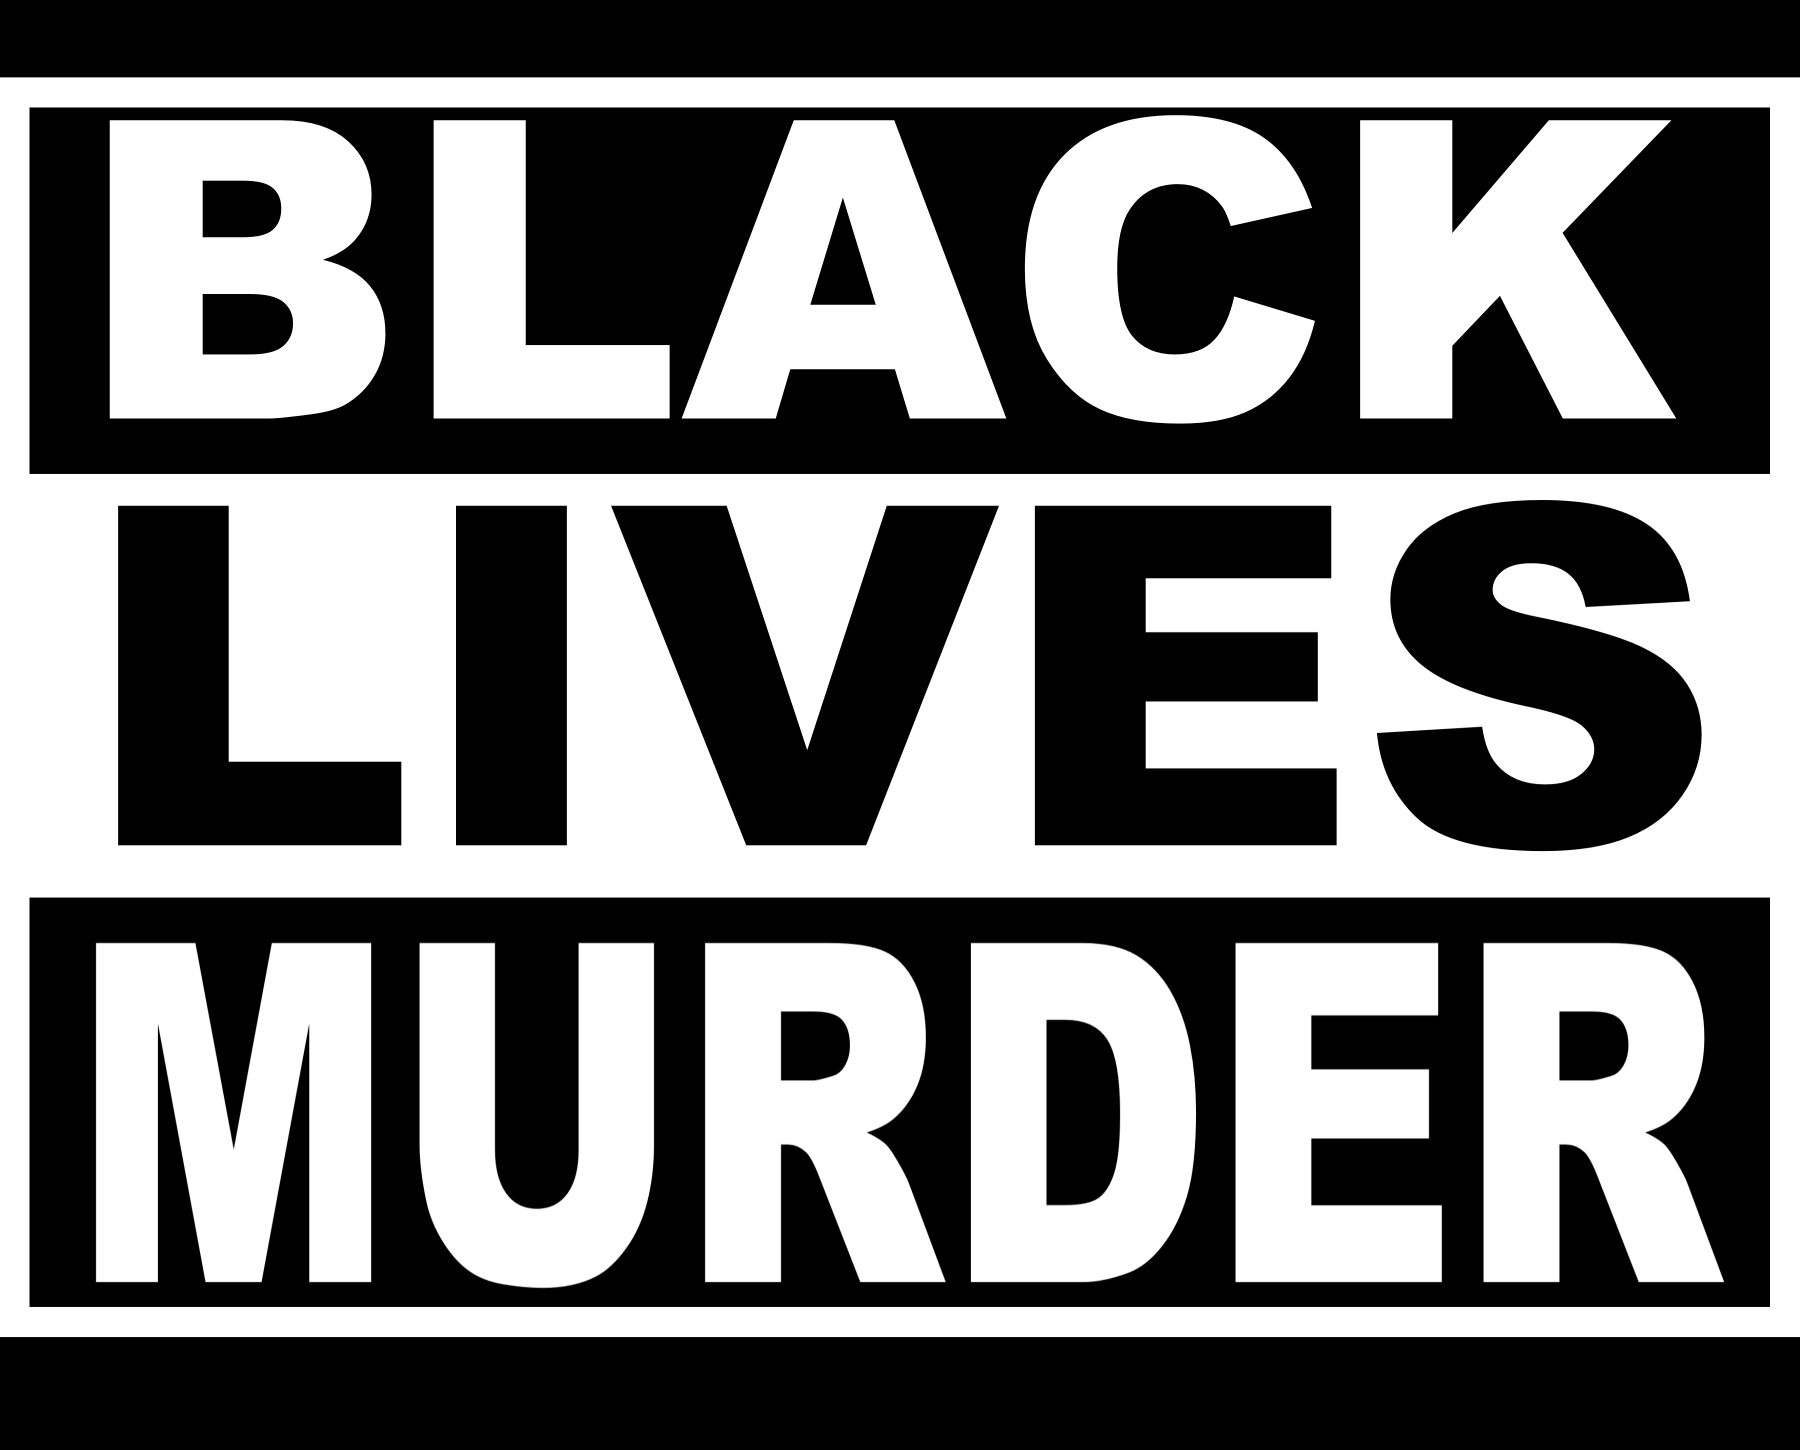 Black Lives Murder, they don't matter